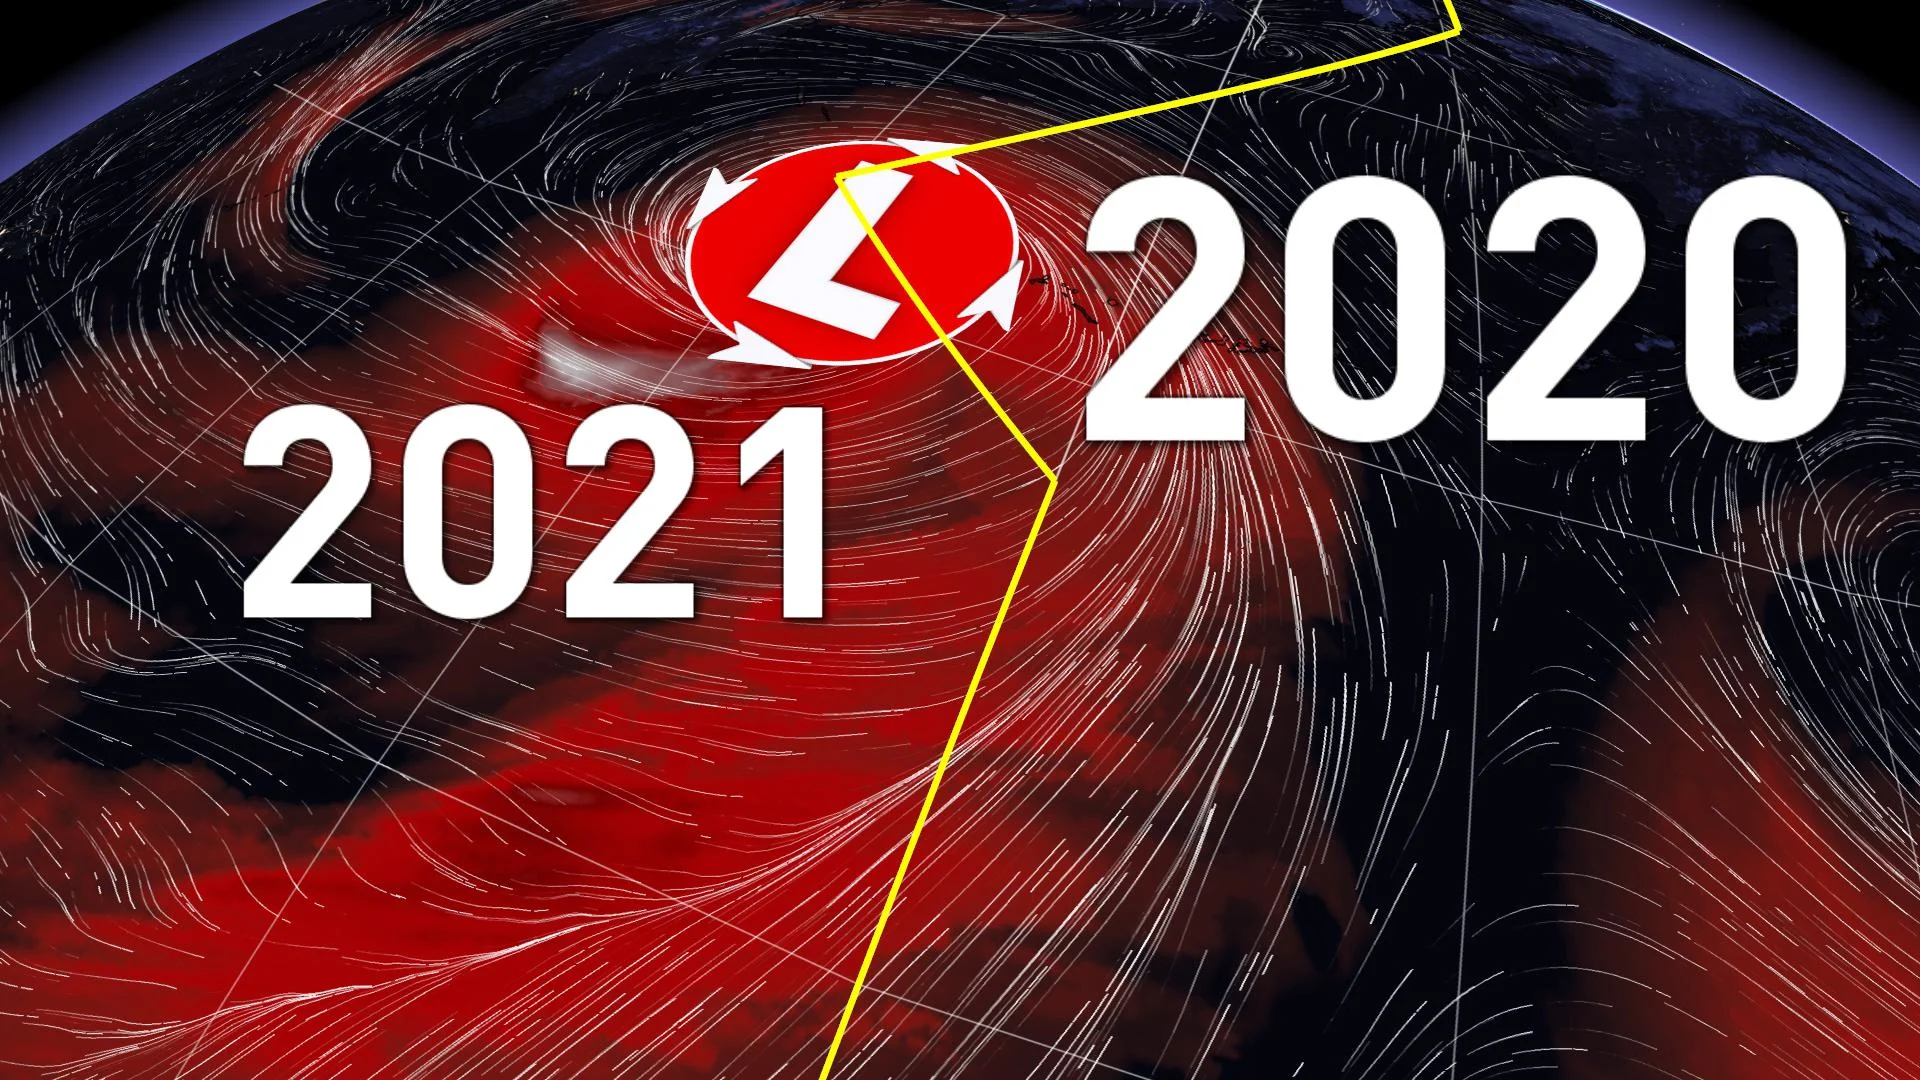 Time-bending monster storm sends air swirling between 2020 and 2021